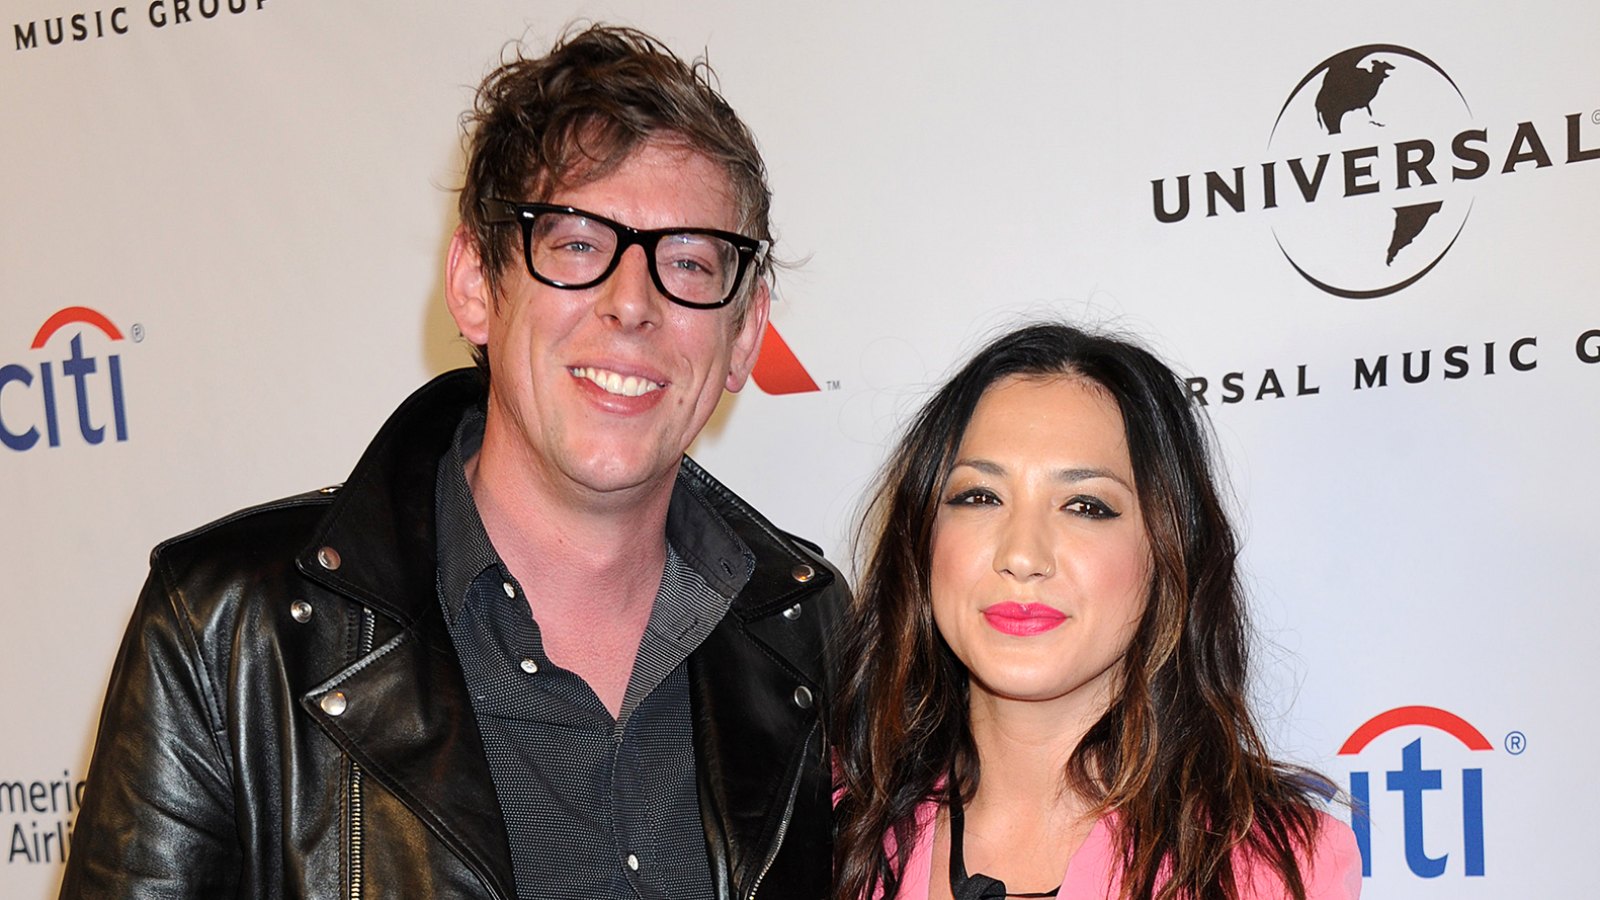 Michelle Branch Is Expecting Rainbow Baby After Previous Miscarriage: ‘Couldn’t Be More Excited’